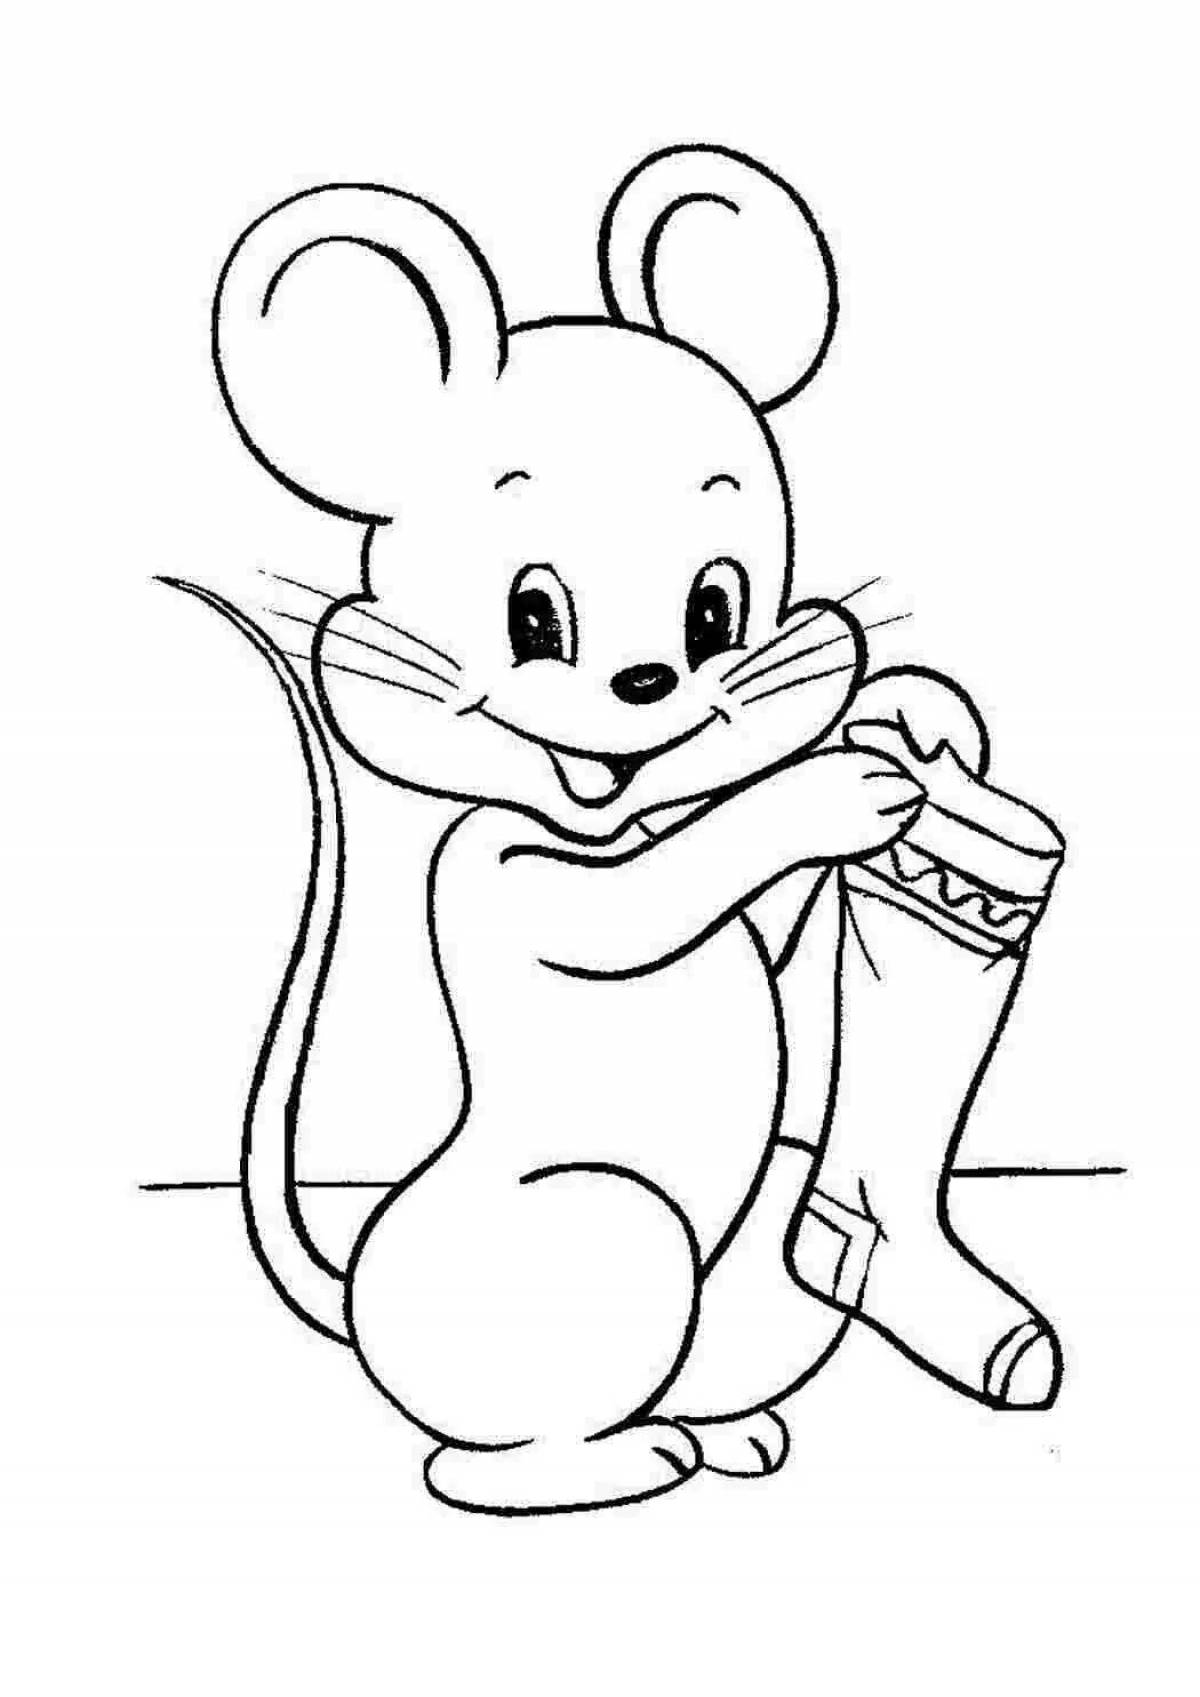 Sparkling mouse coloring book for kids